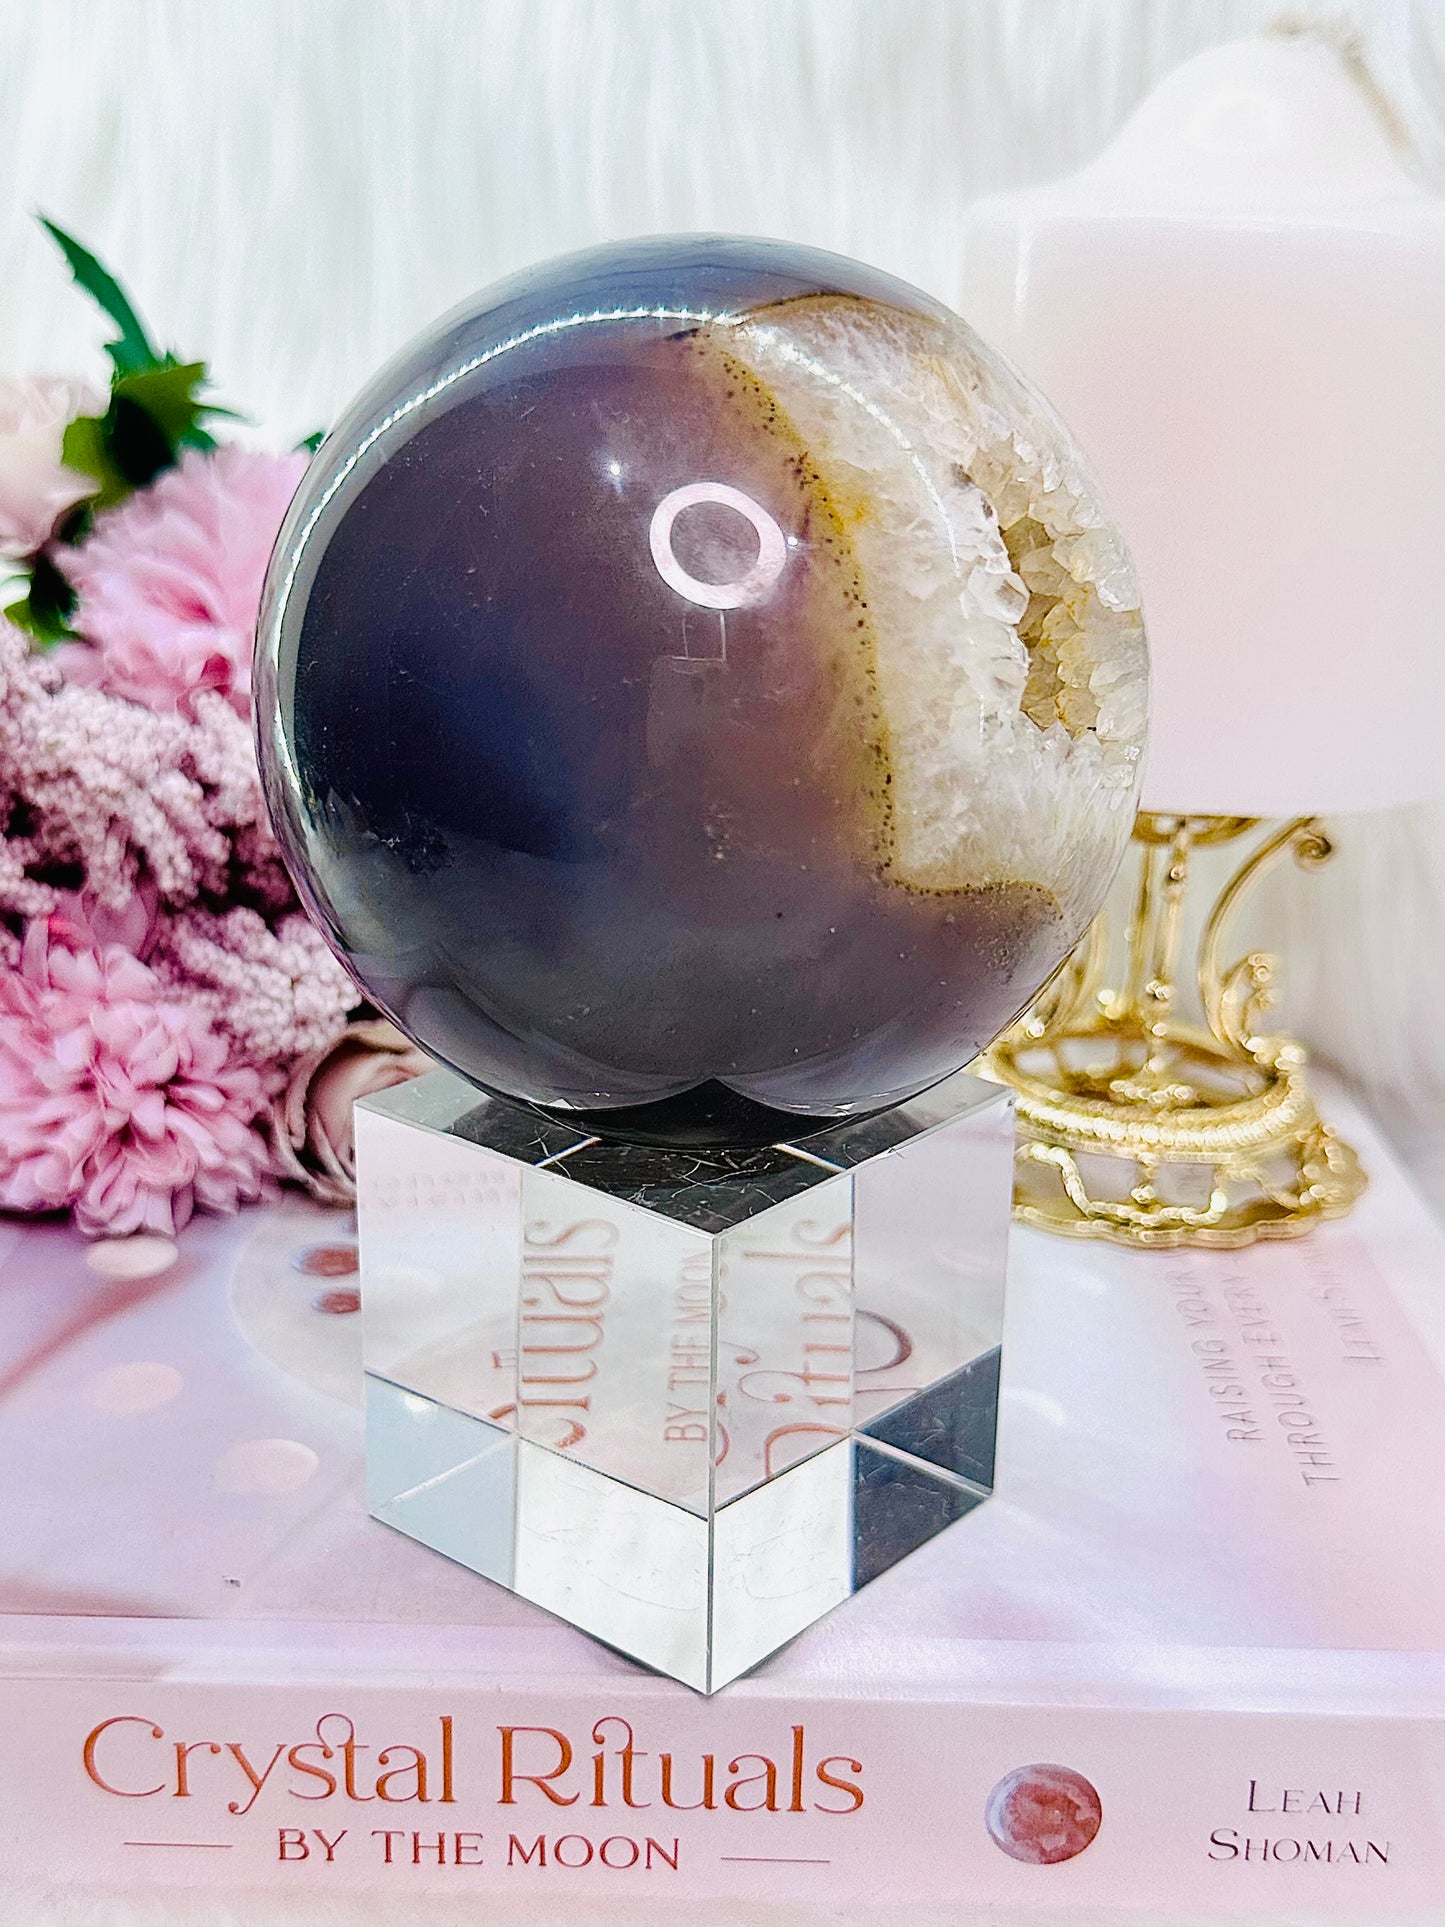 Magical & Incredible Large 821gram Perfect Druzy Agate Sphere On Stand From Brazil (Glass stand in pic is display only)